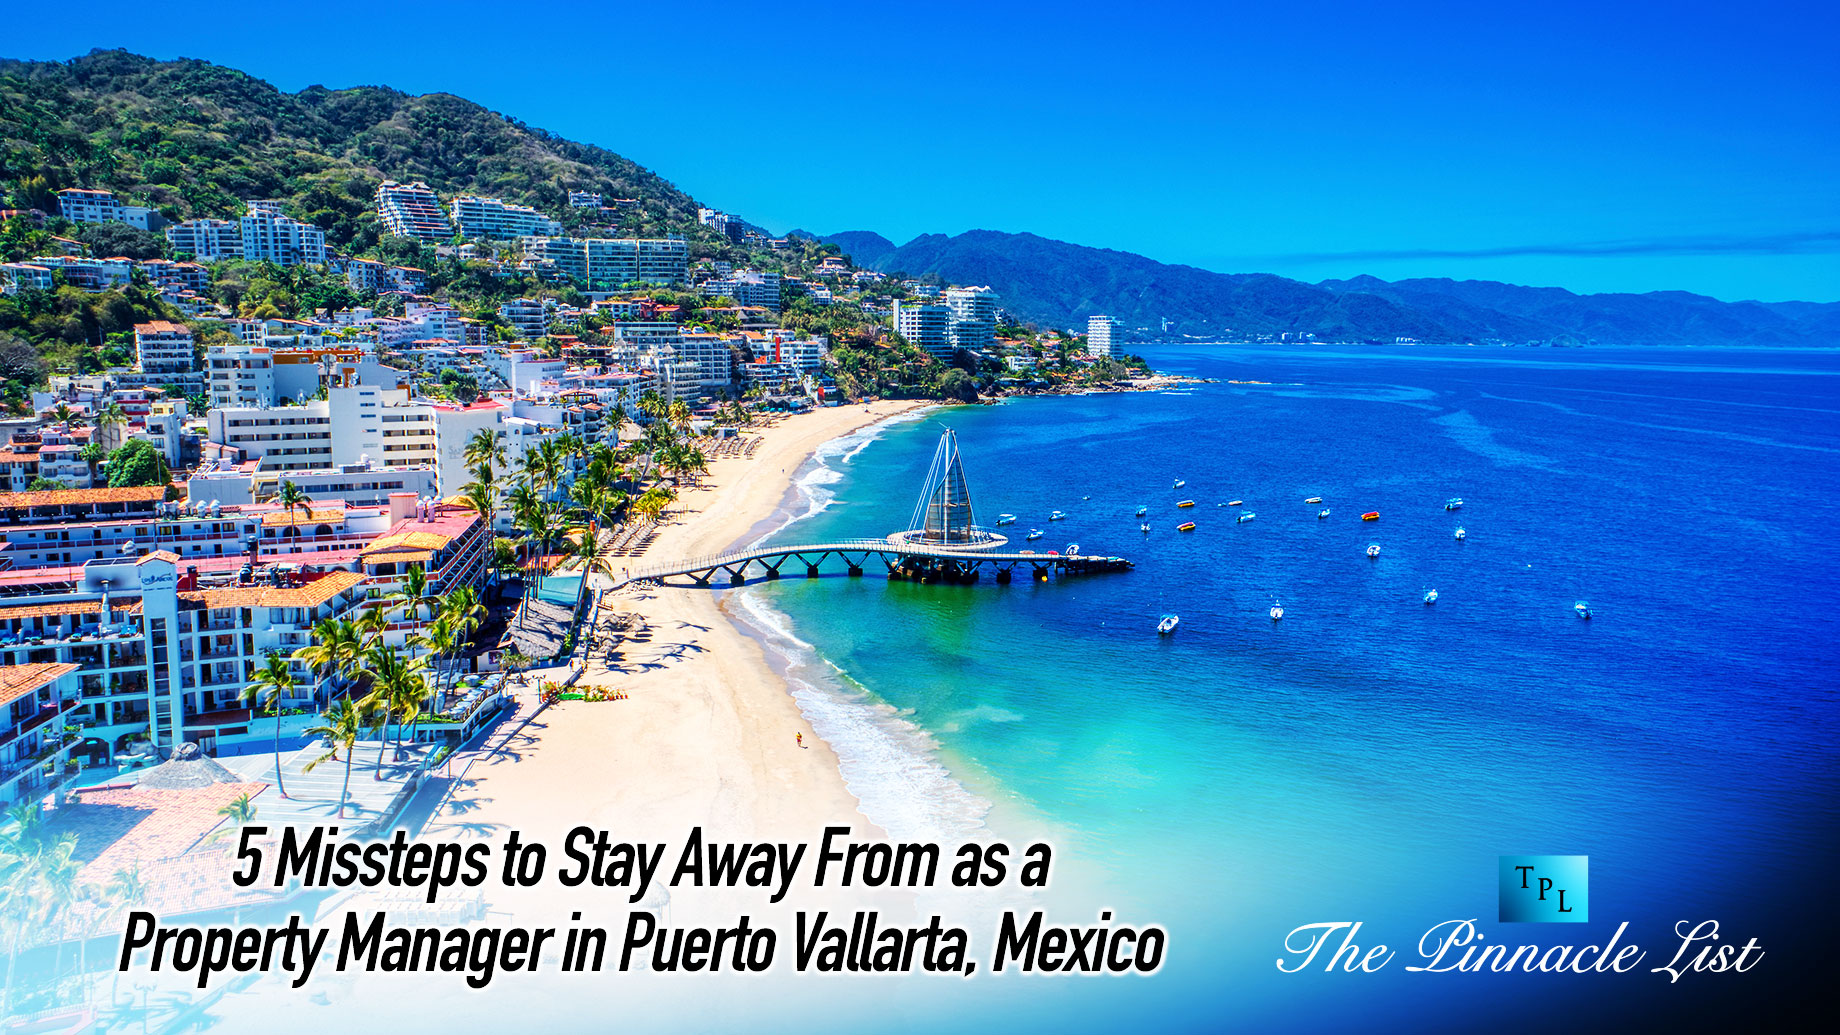 5 Missteps to Stay Away From as a Property Manager in Puerto Vallarta, Mexico